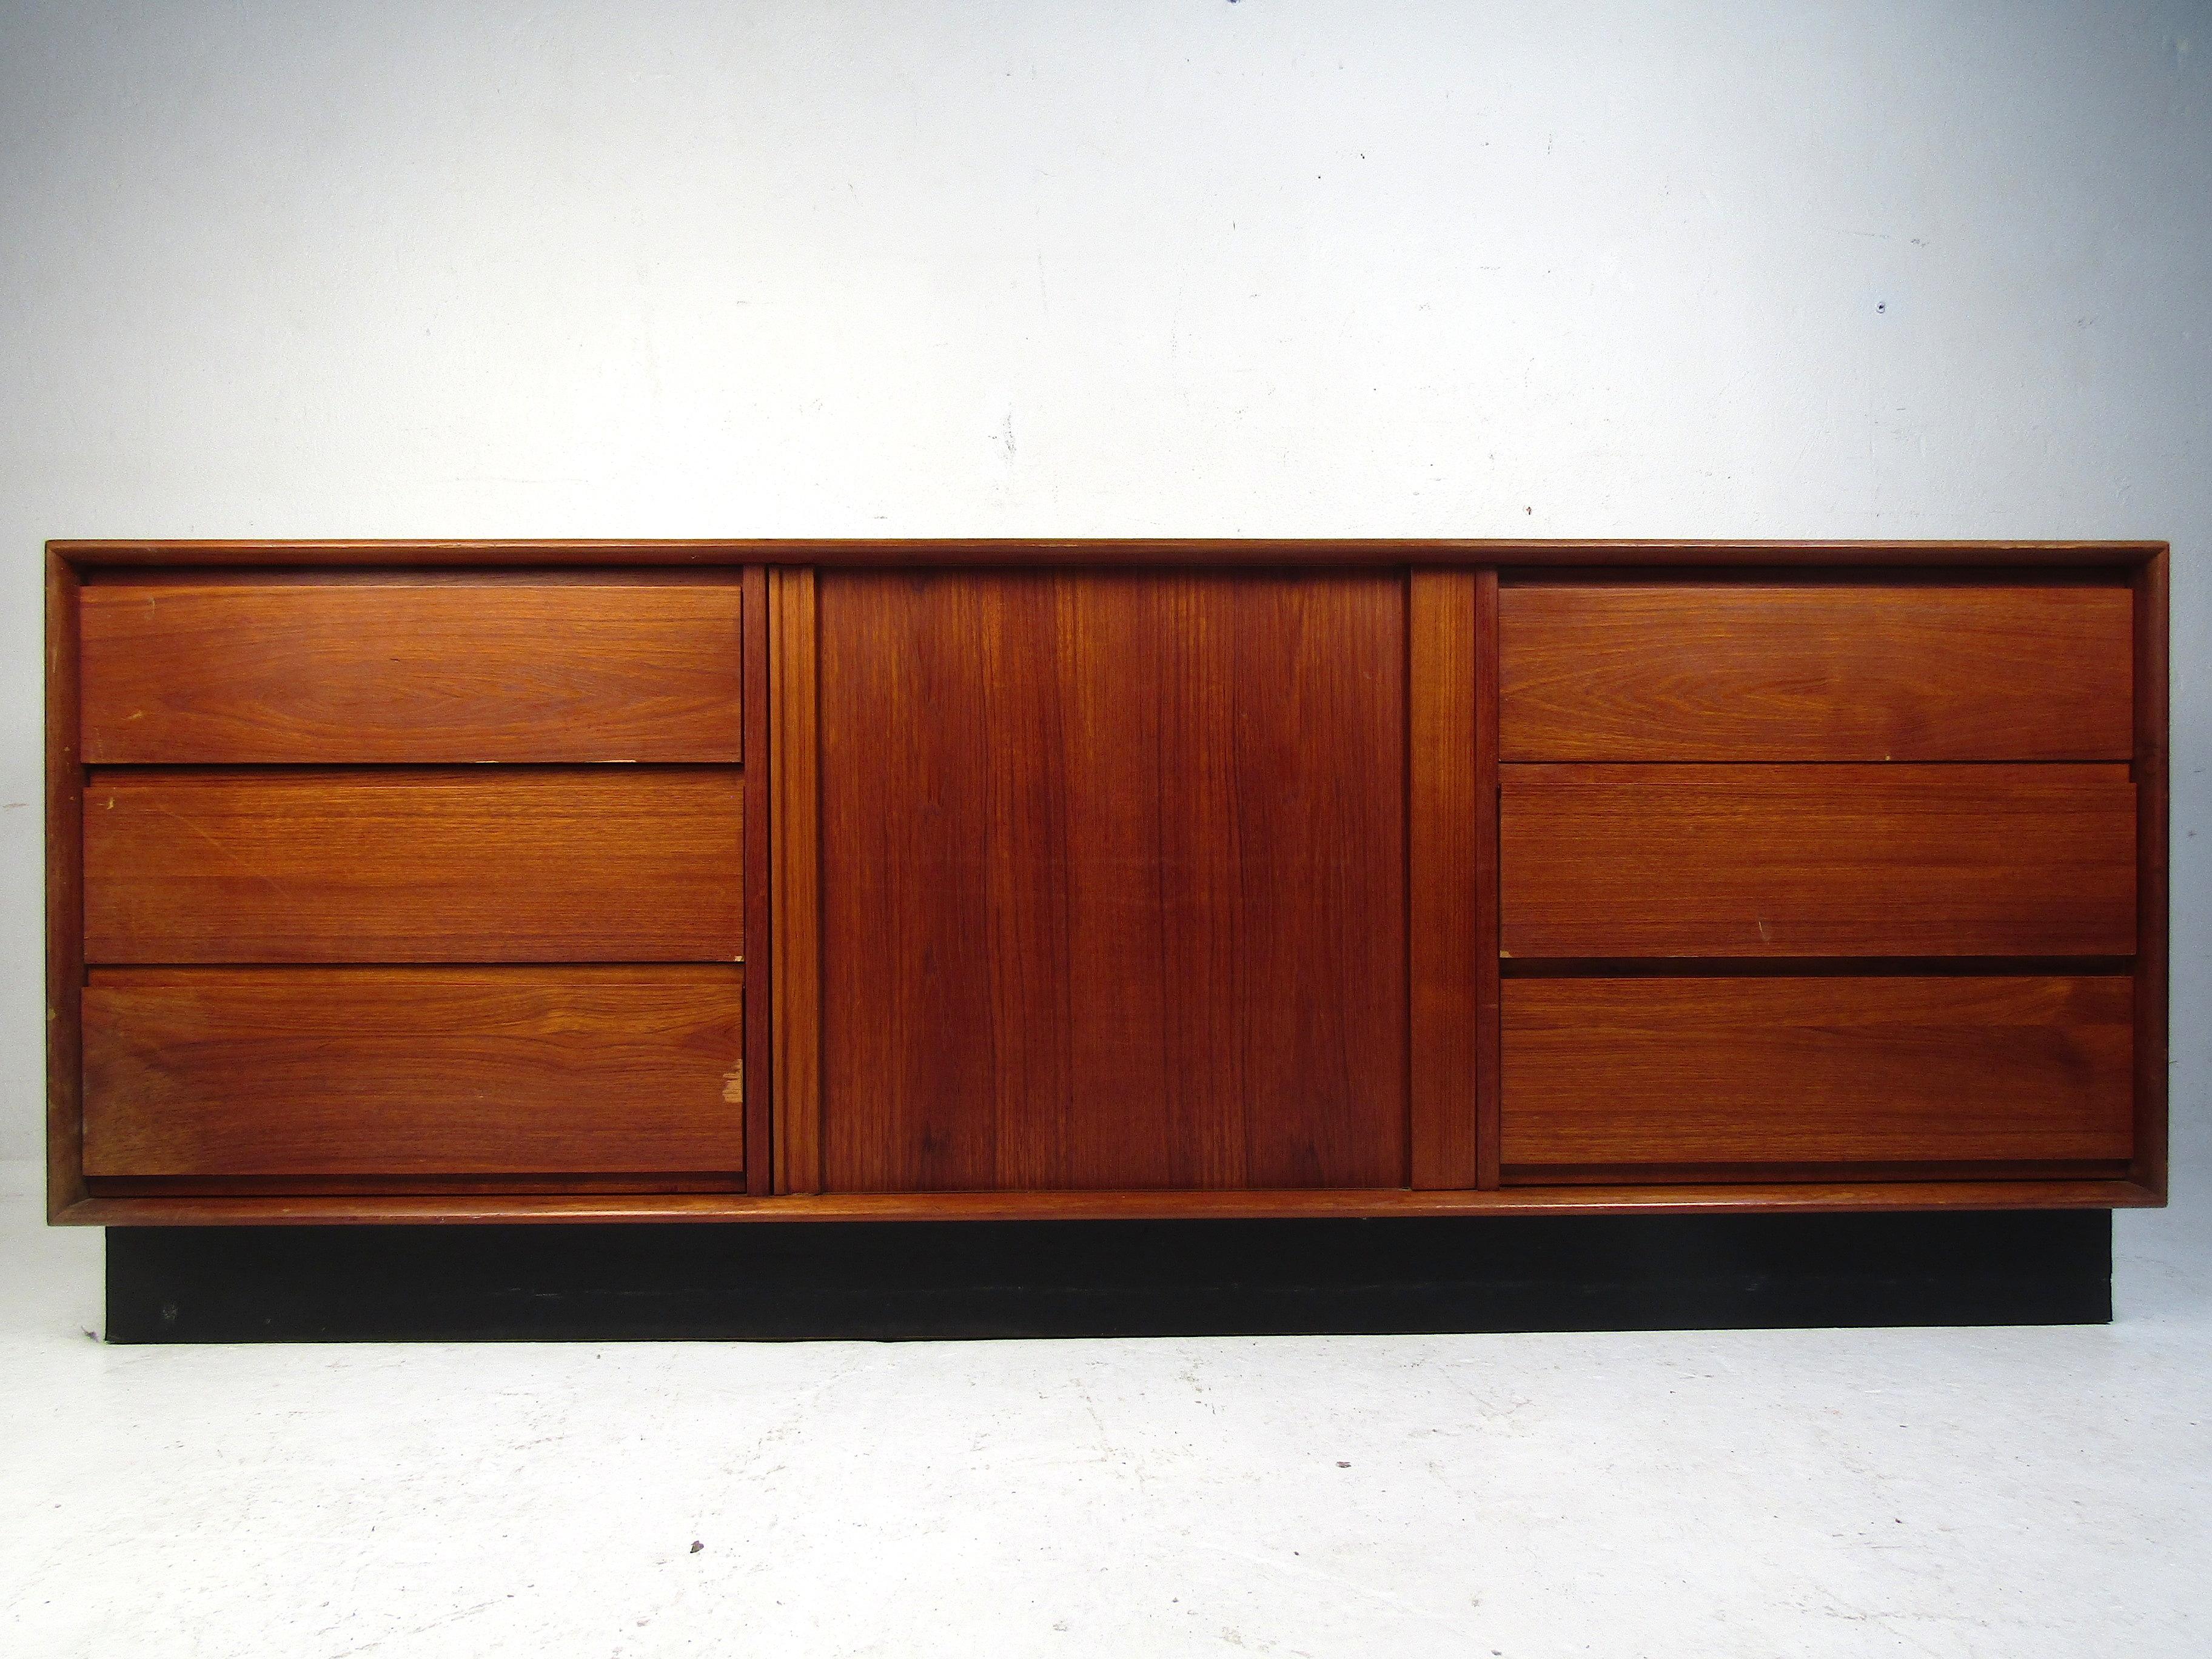 Stylish Danish Mid-Century Modern dresser by Art Furn. Good-looking teak veneer throughout, with six dovetail-jointed drawers on each flank of the case piece, complemented by cabinet space concealed by a tambour door in the center. Black skirt base.